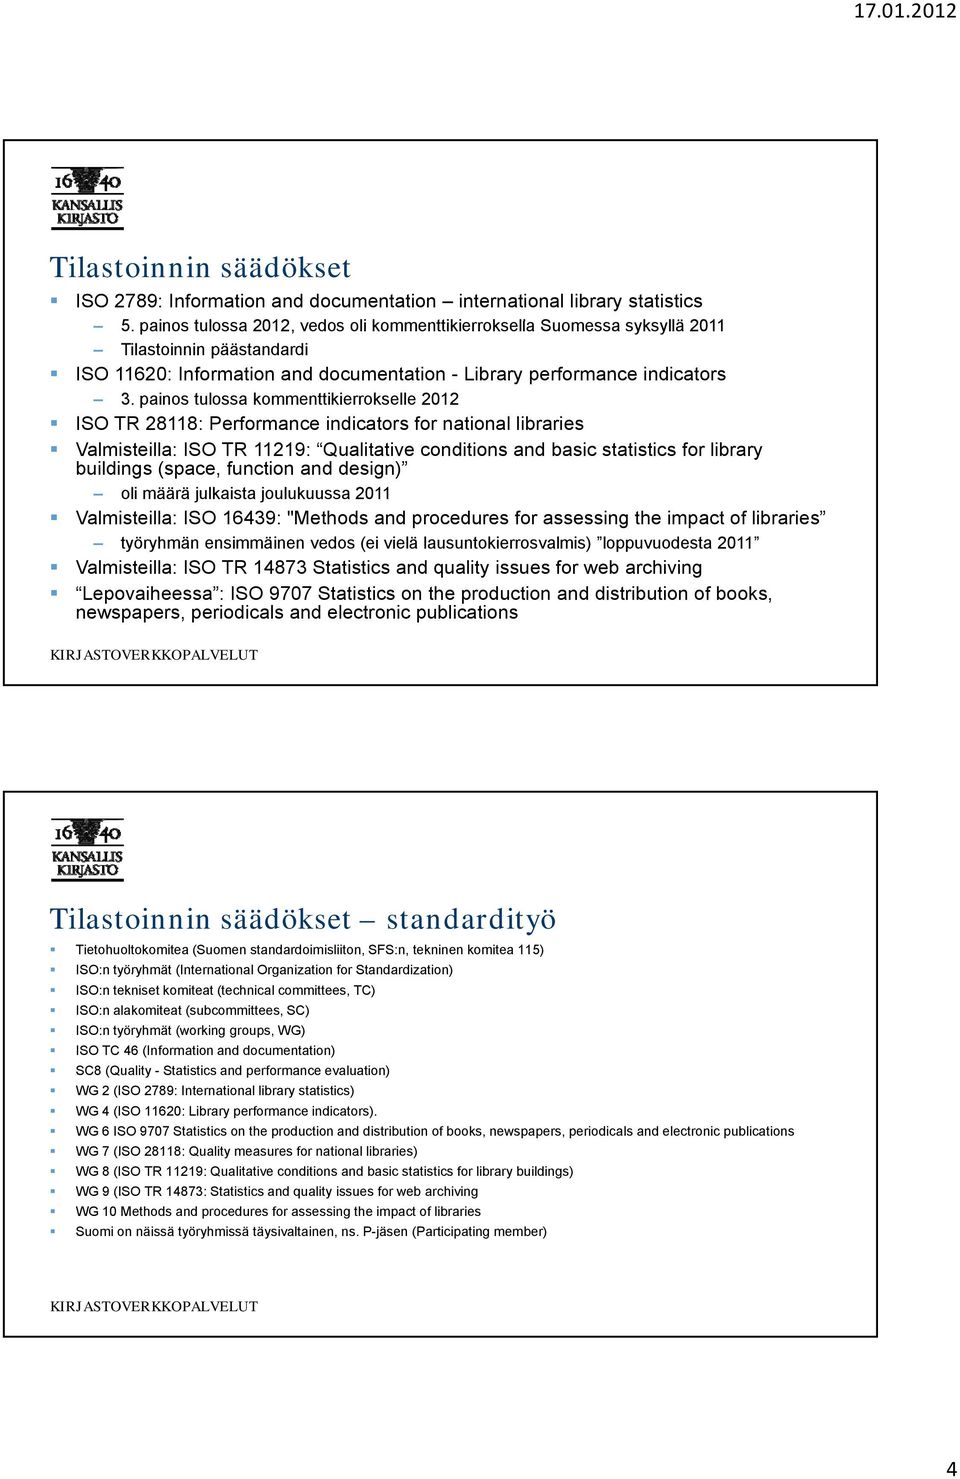 painos tulossa kommenttikierrokselle 2012 ISO TR 28118: Performance indicators for national libraries Valmisteilla: ISO TR 11219: Qualitative conditions and basic statistics for library buildings